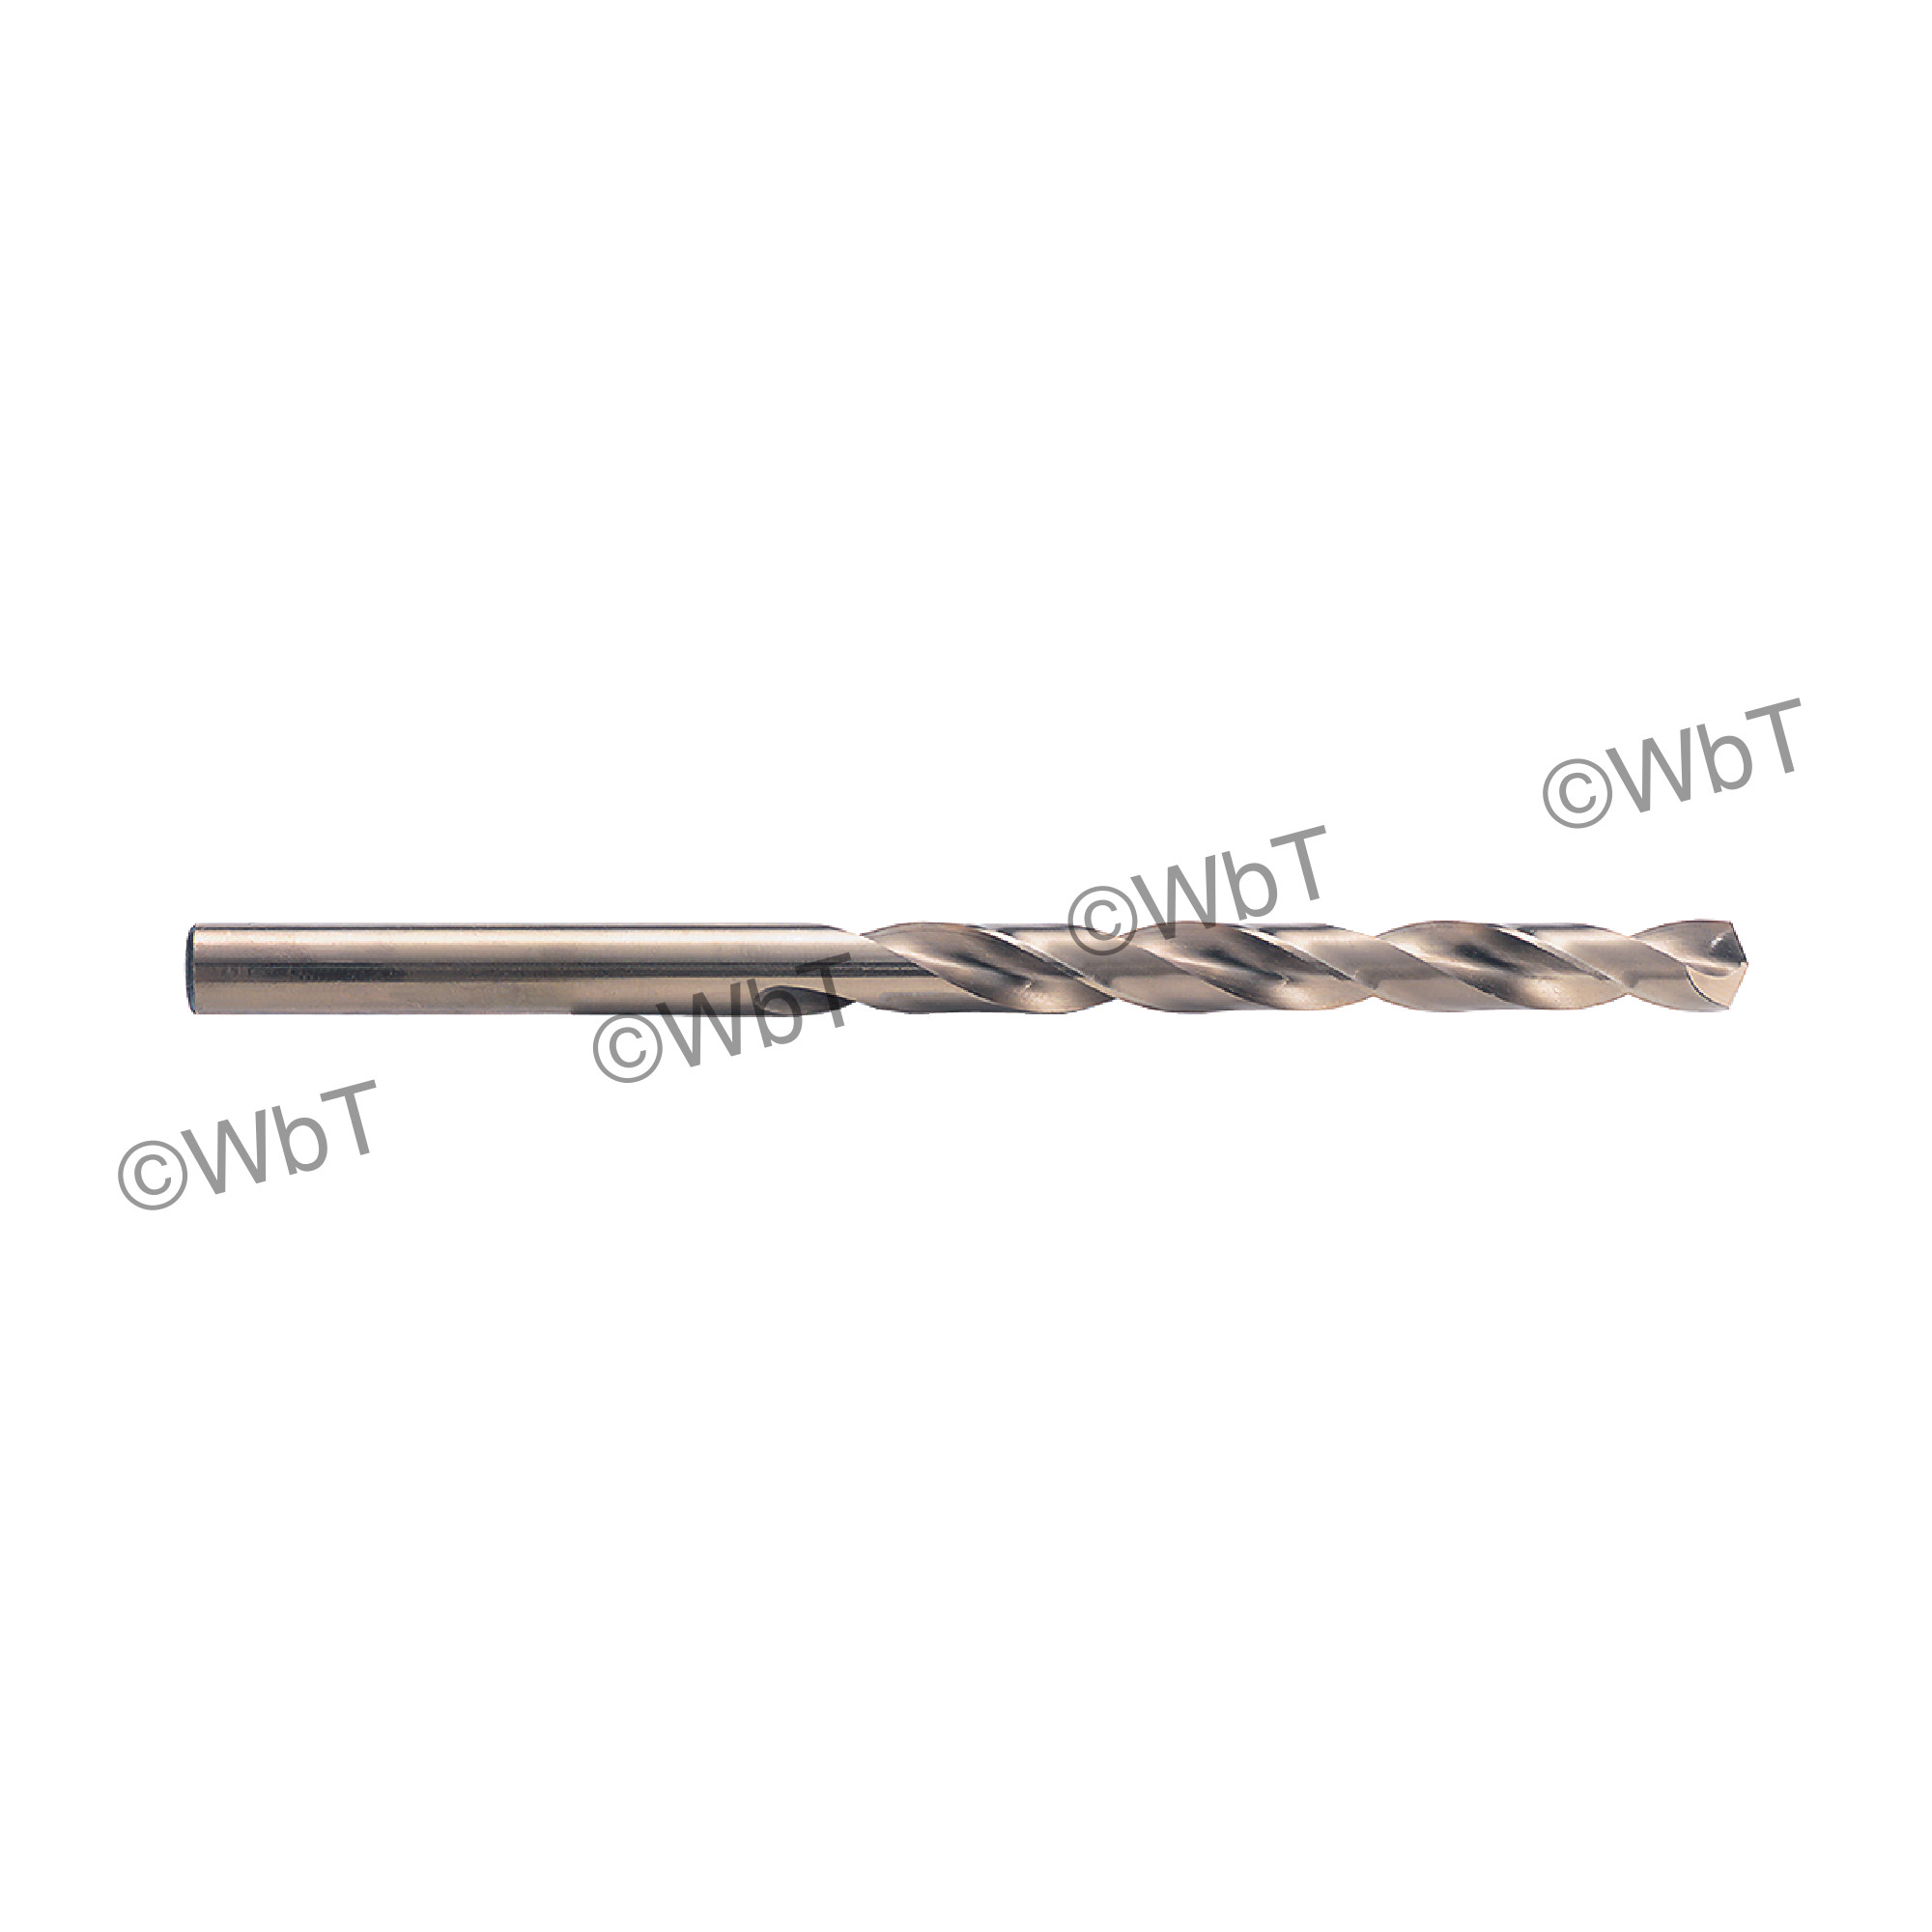 pack of 12 Drills-Tool Material: High speed steel Size: #9 Overall Length: 6 Flute Length: 3-5/8 Shank Style: Straight shank Drill Type: Long TTC PRODUCTION High Speed Steel Taper Length Long 